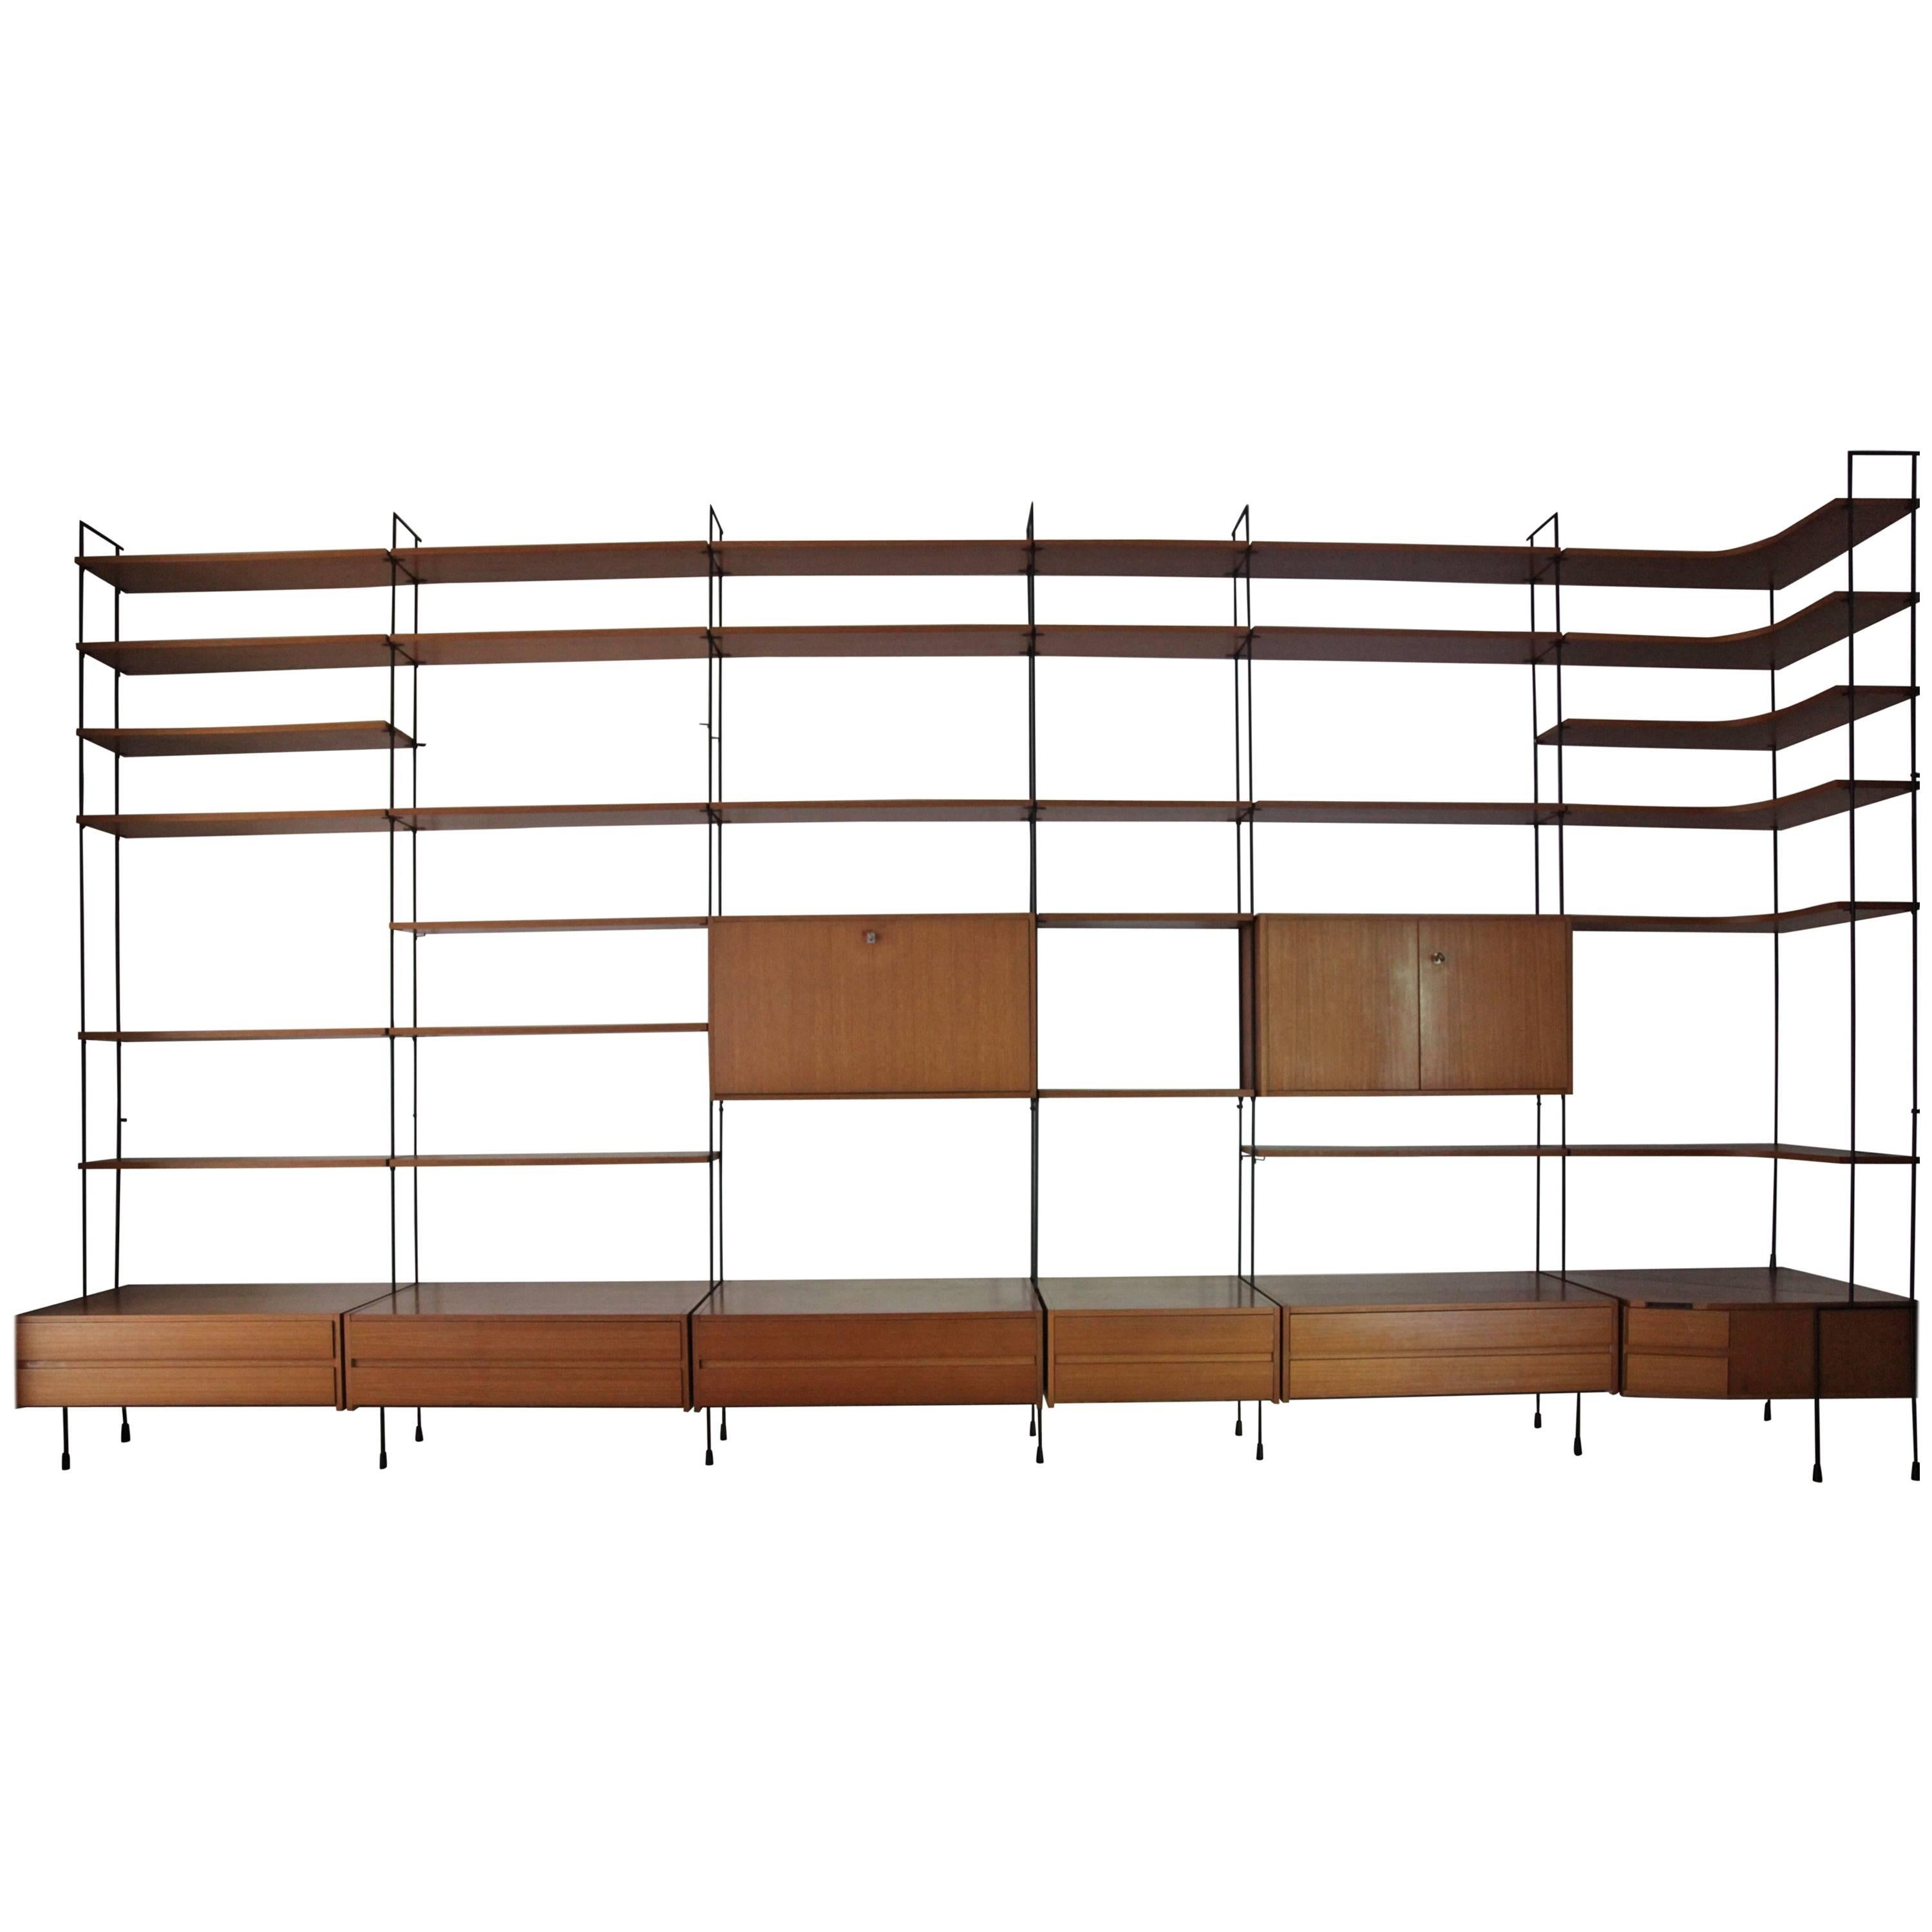 Modular Wall Unit Shelving System in Teak by Hilker, 1960s, Germany